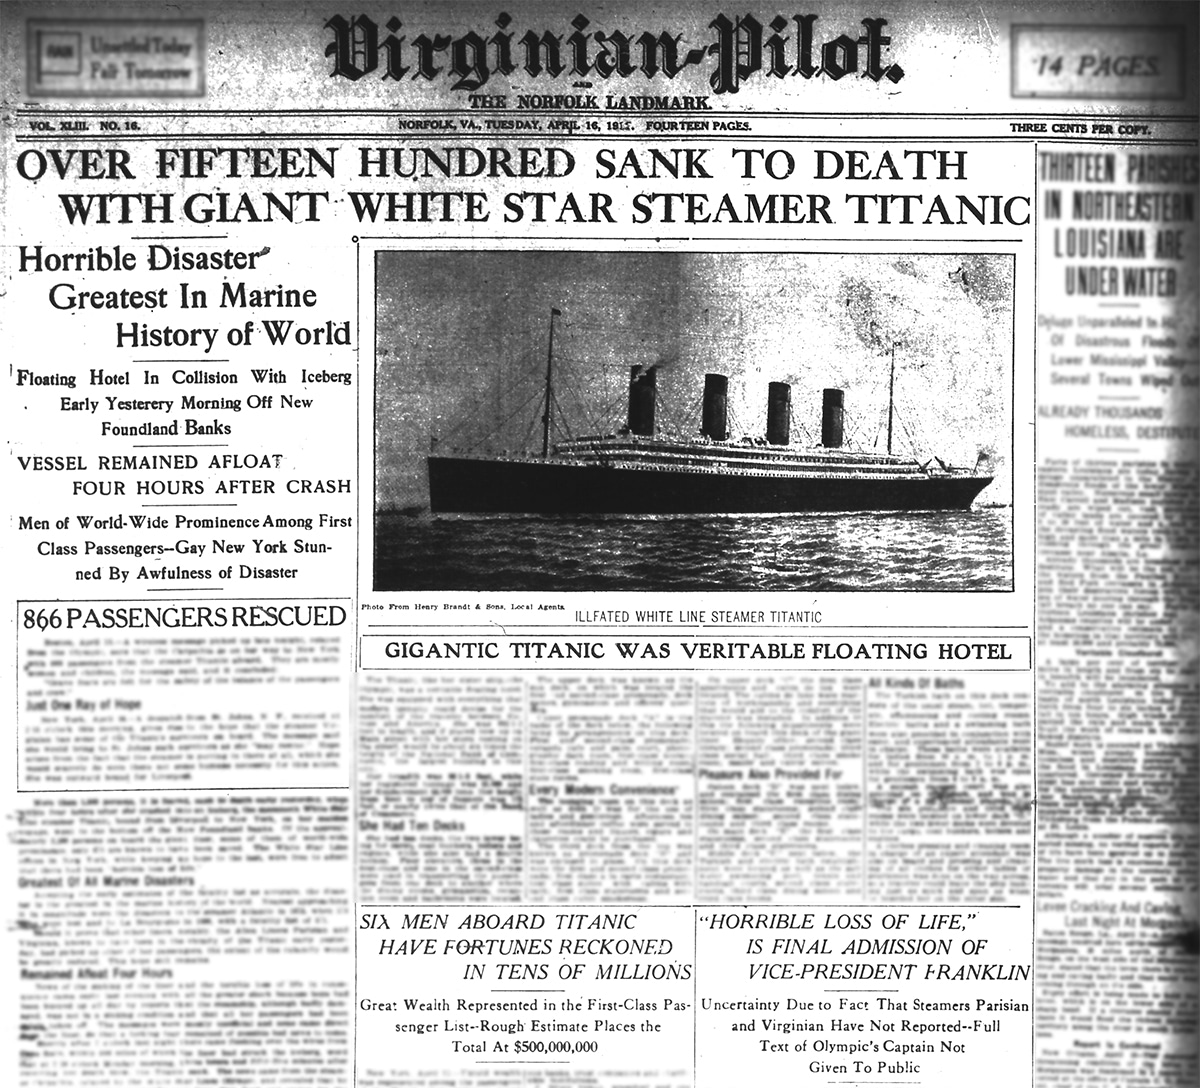 Titanic In Black And White Headlines Both Informative And